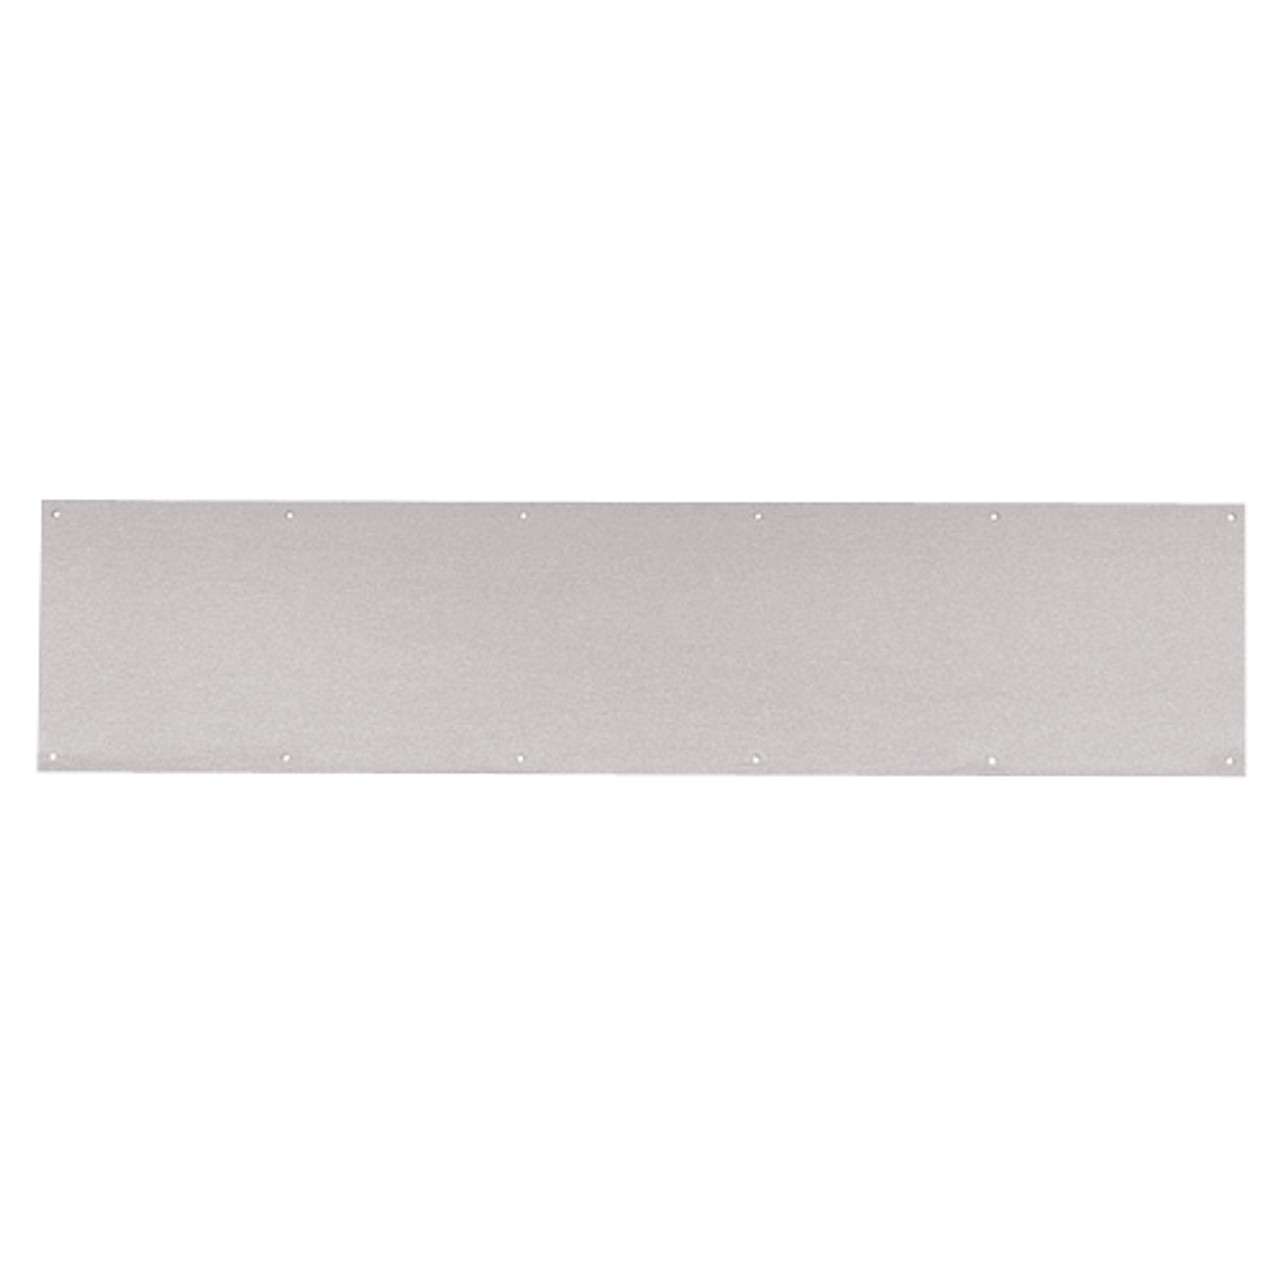 8400-US32D-36x26-B-CS Ives 8400 Series Protection Plate in Satin Stainless Steel